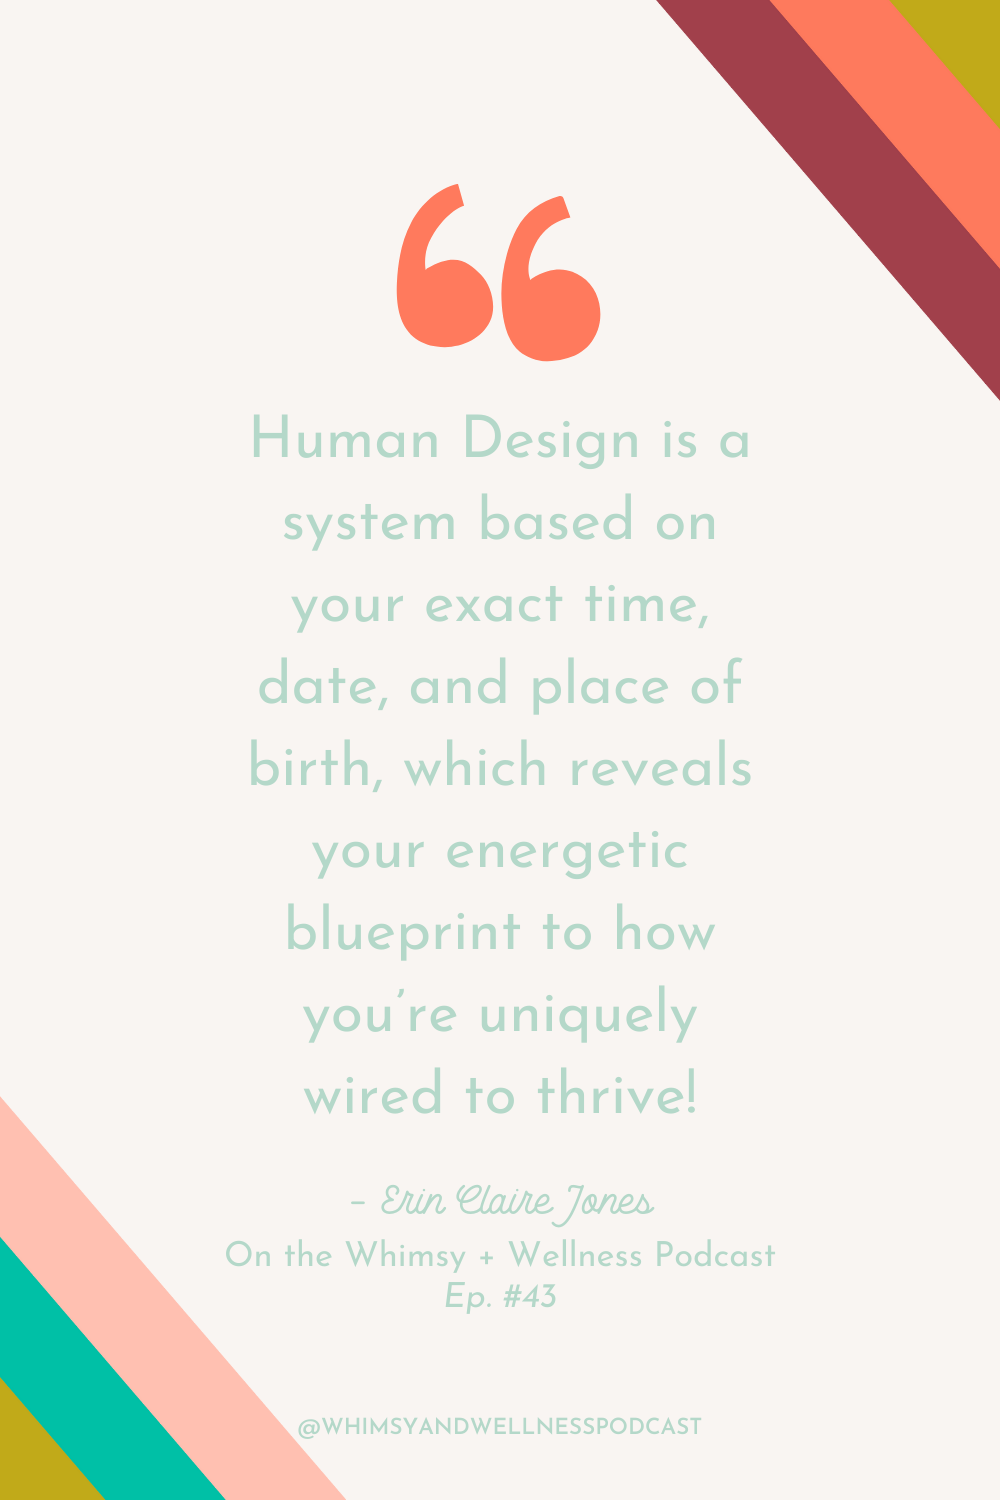 Human Design for Beginners: Manifesting Generators, Generators, Projectors, Reflectors and Manifestors...Oh My! with Erin Claire Jones